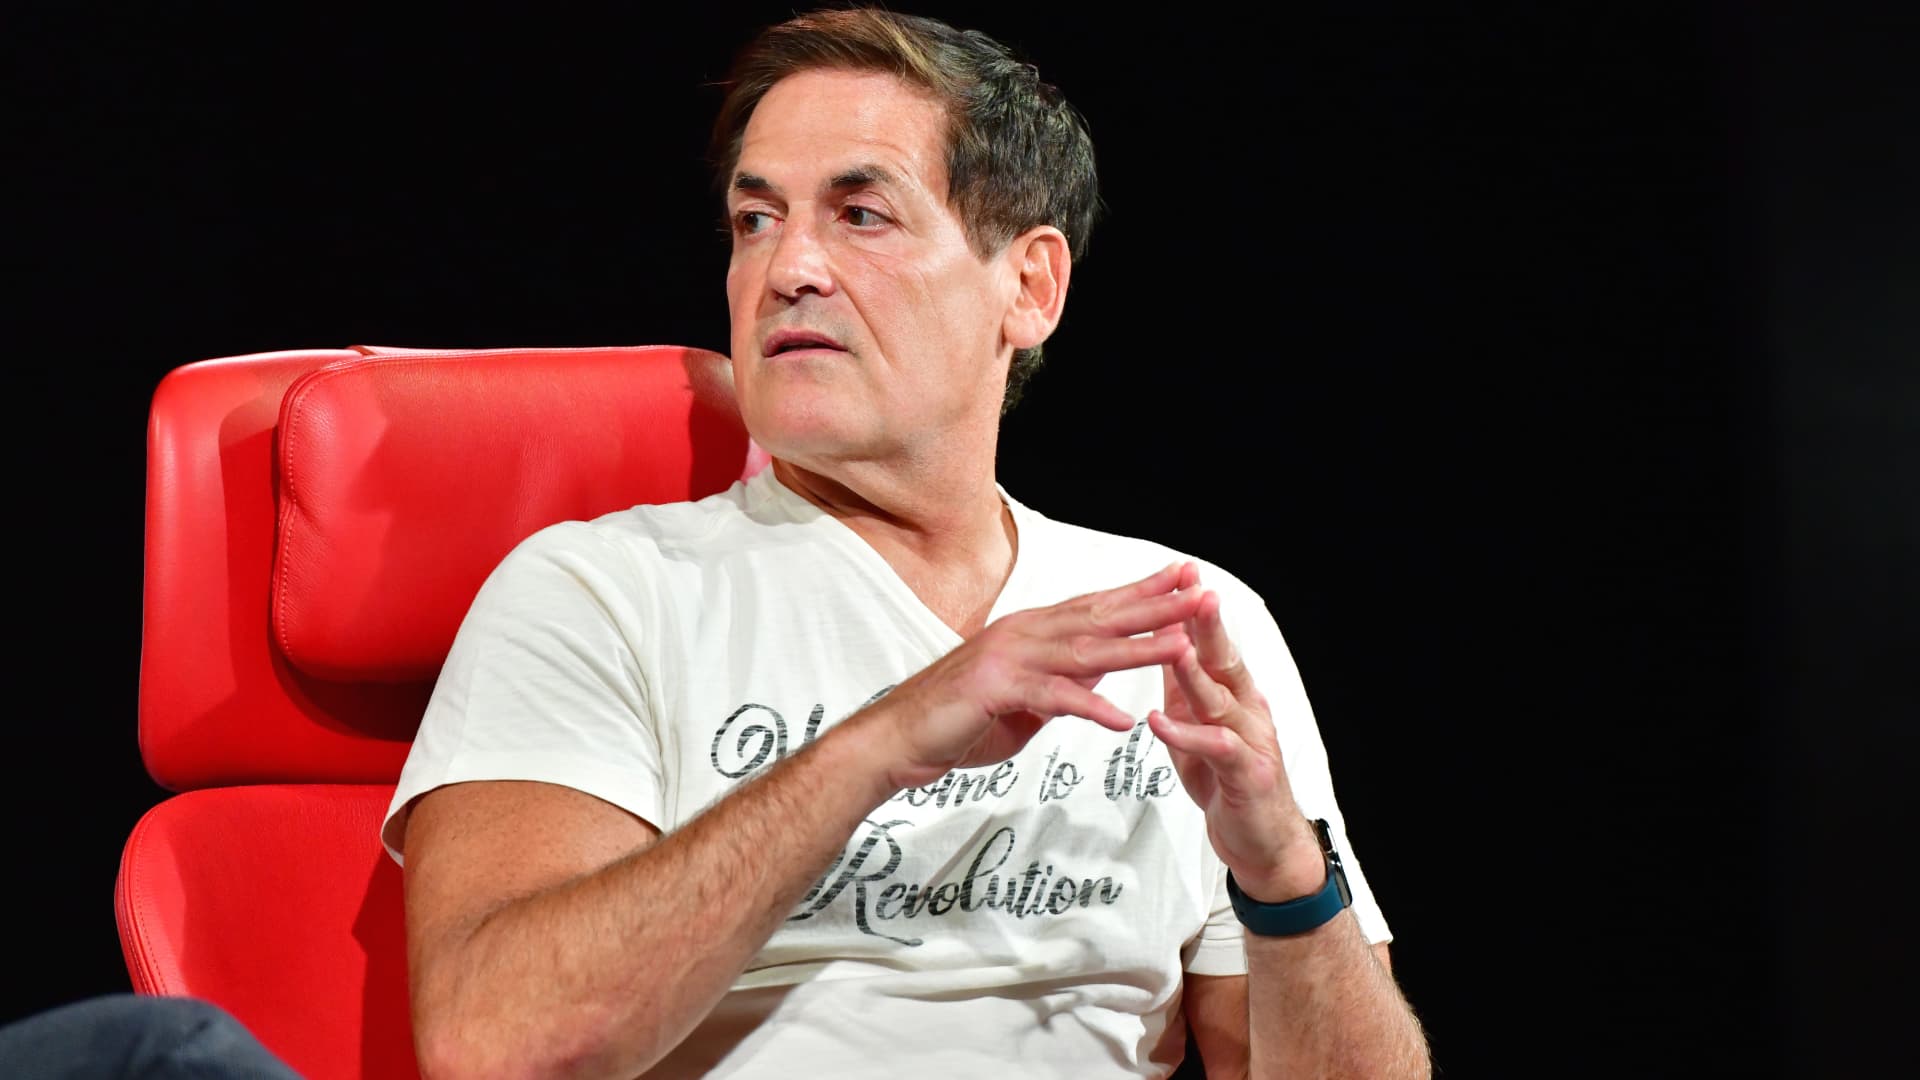 Mark Cuban credits first tech job to trick question interview strategy